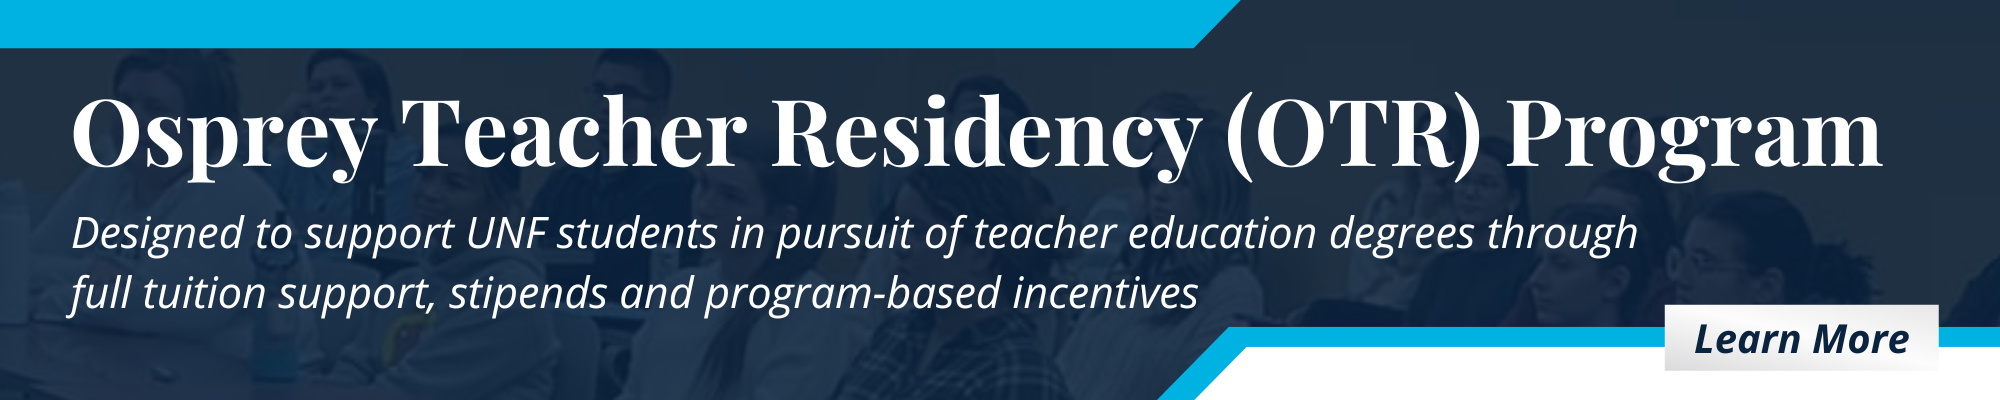 osprey teacher residency program designed to support UNF students pursuing teacher education degrees with full tuition support and incentives